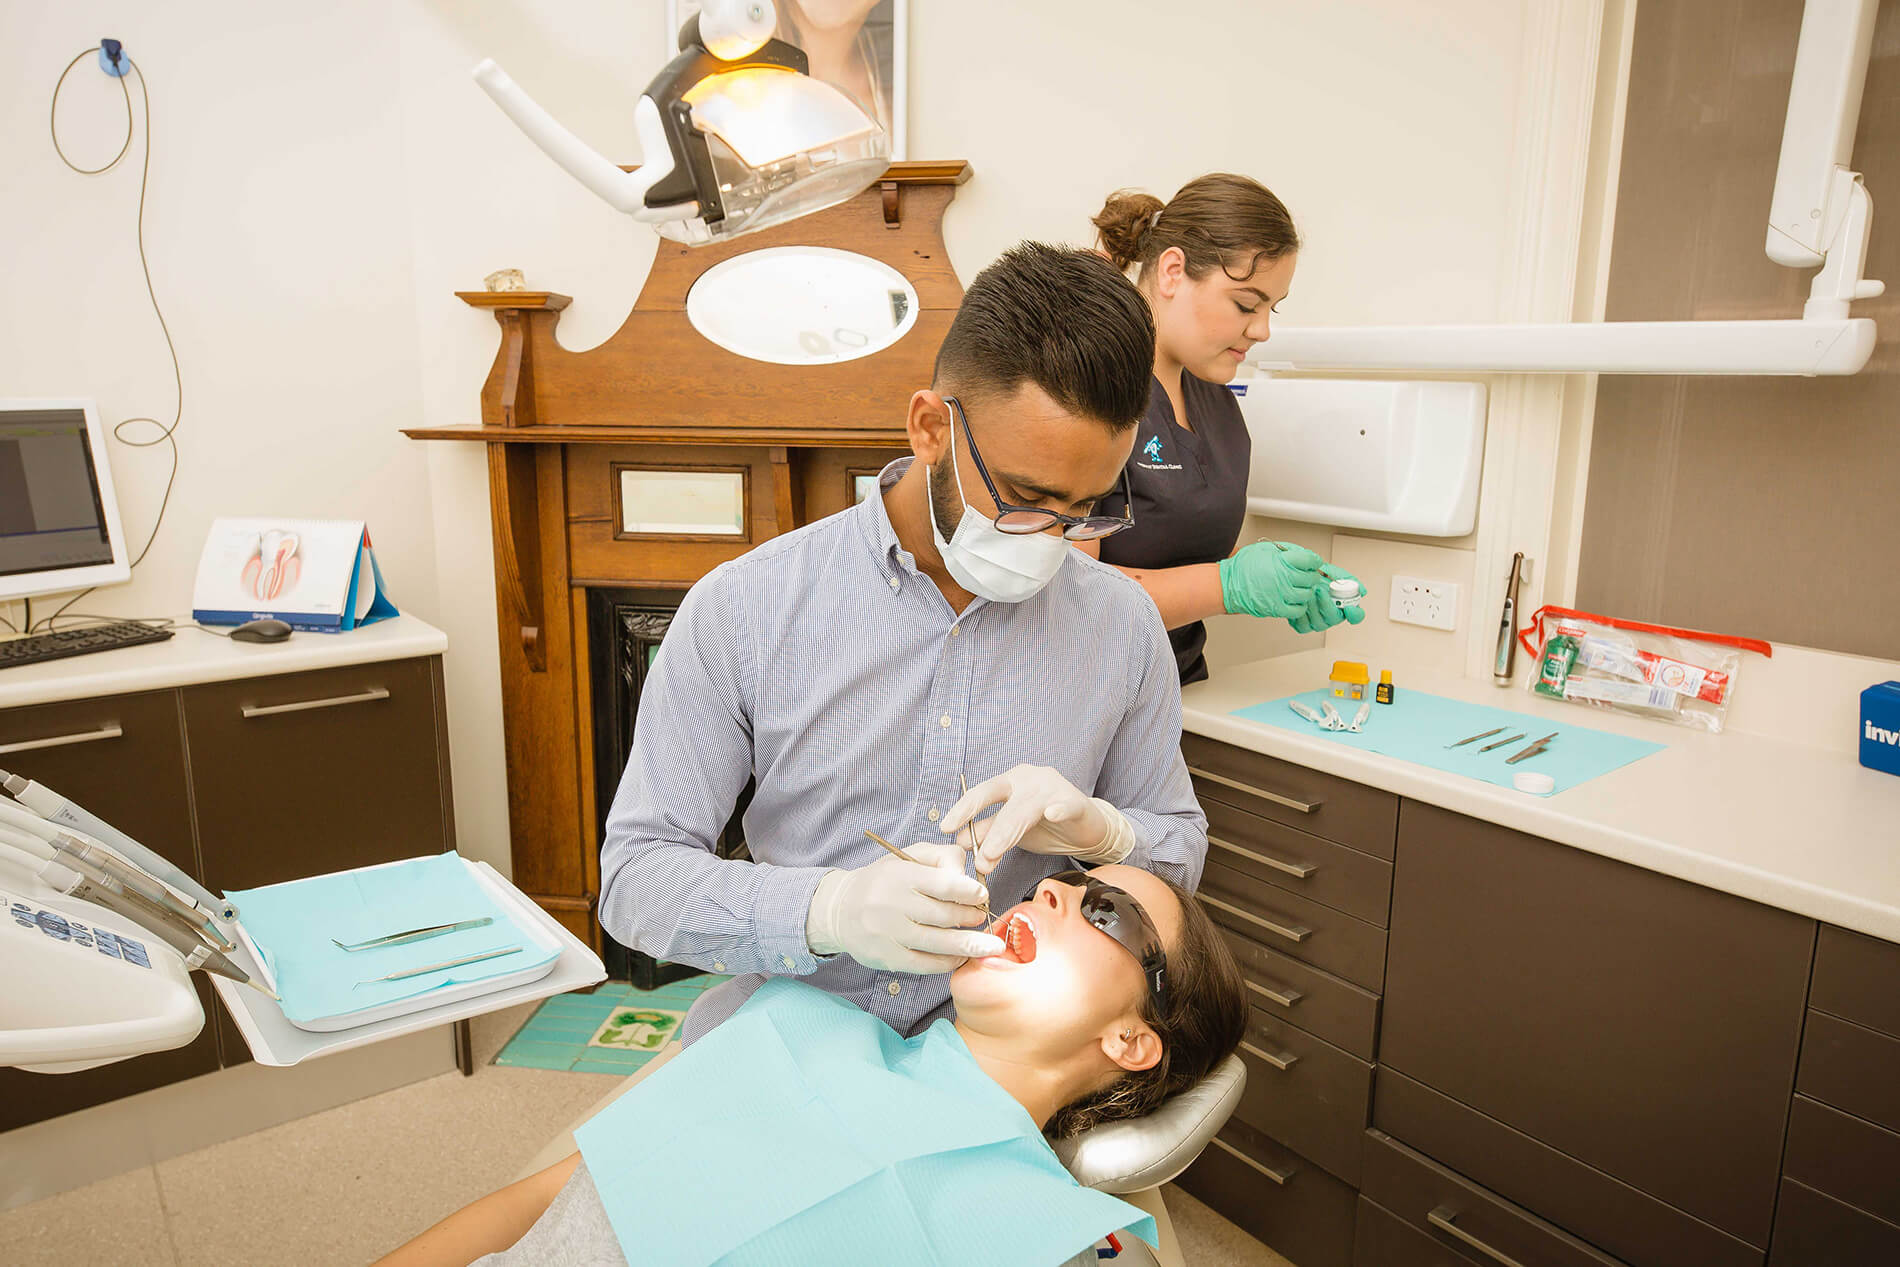 Midway Dental Clinic